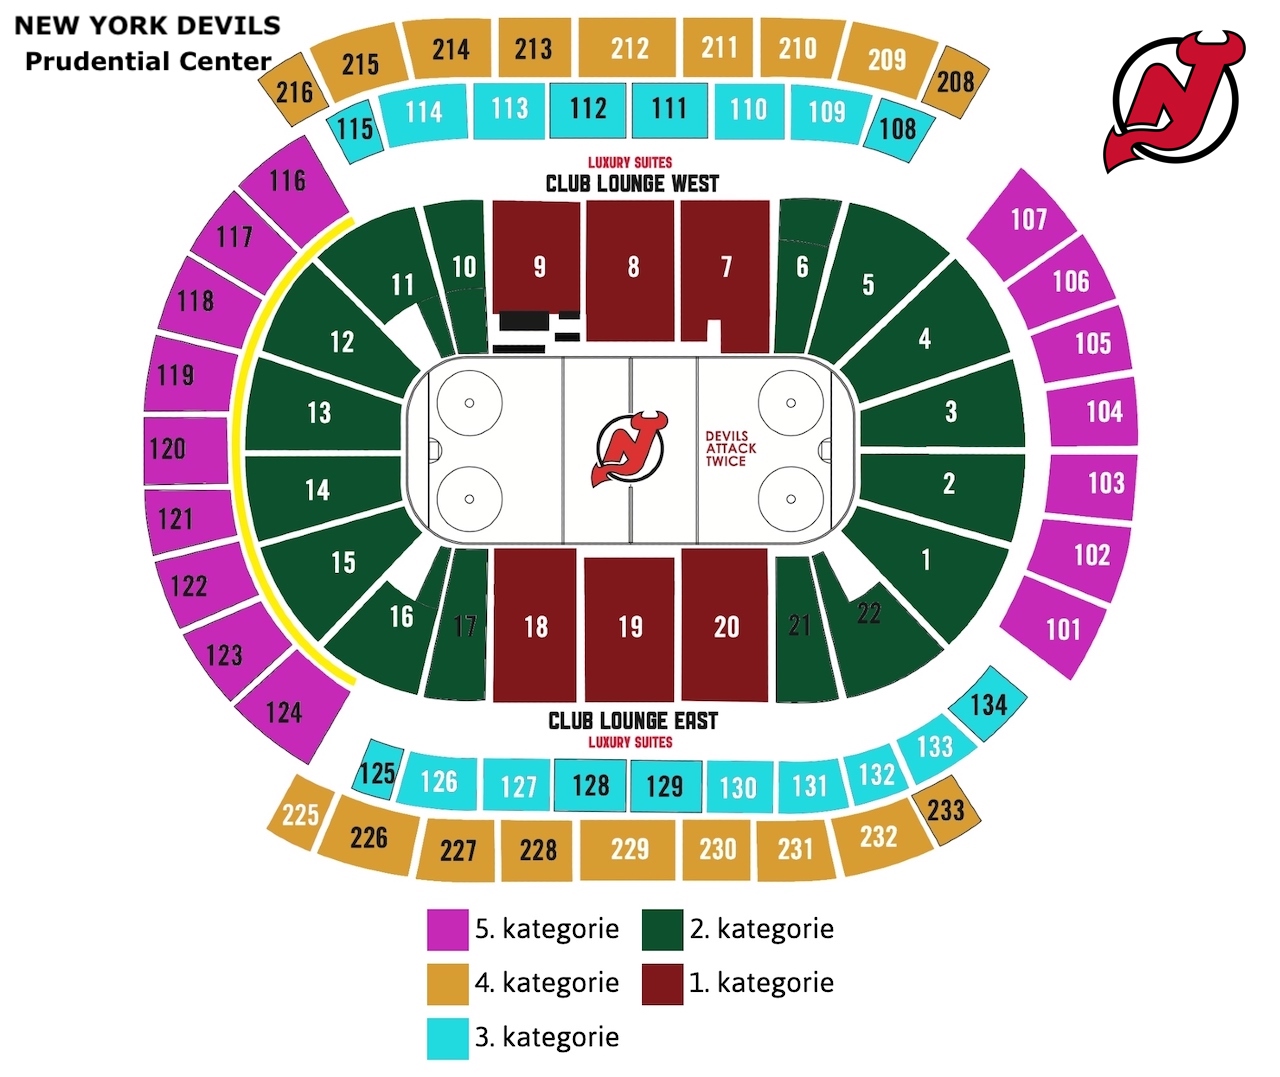 NY Devils | Prudential Center - map.jpeg